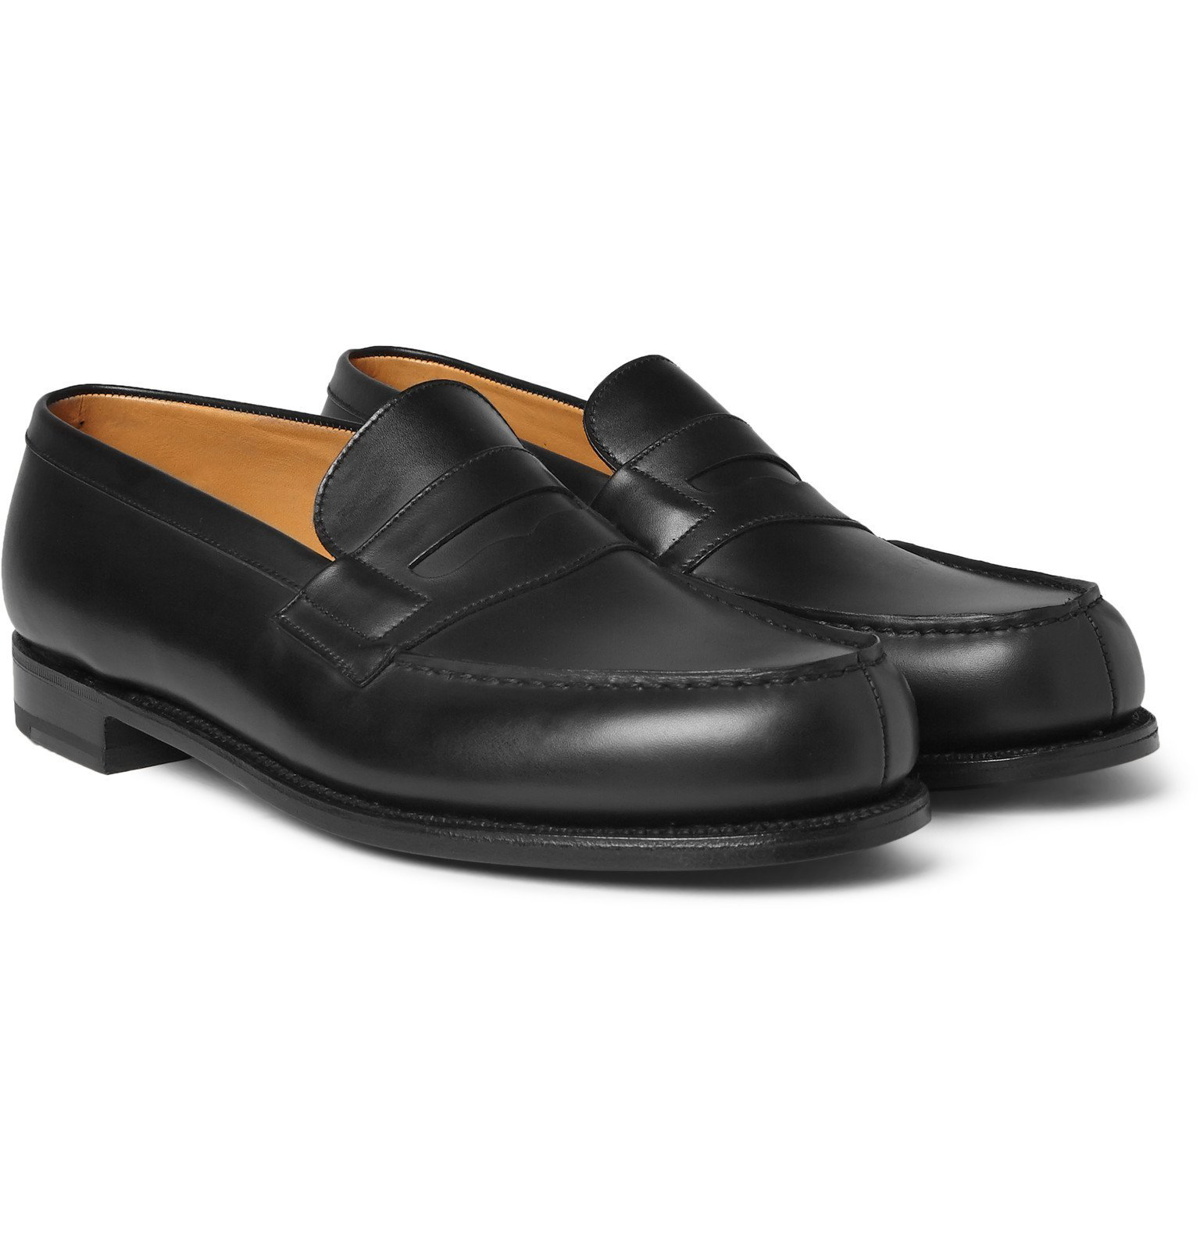 J.M. Weston - 180 The Moccasin Leather Penny Loafers - Black J.M. Weston